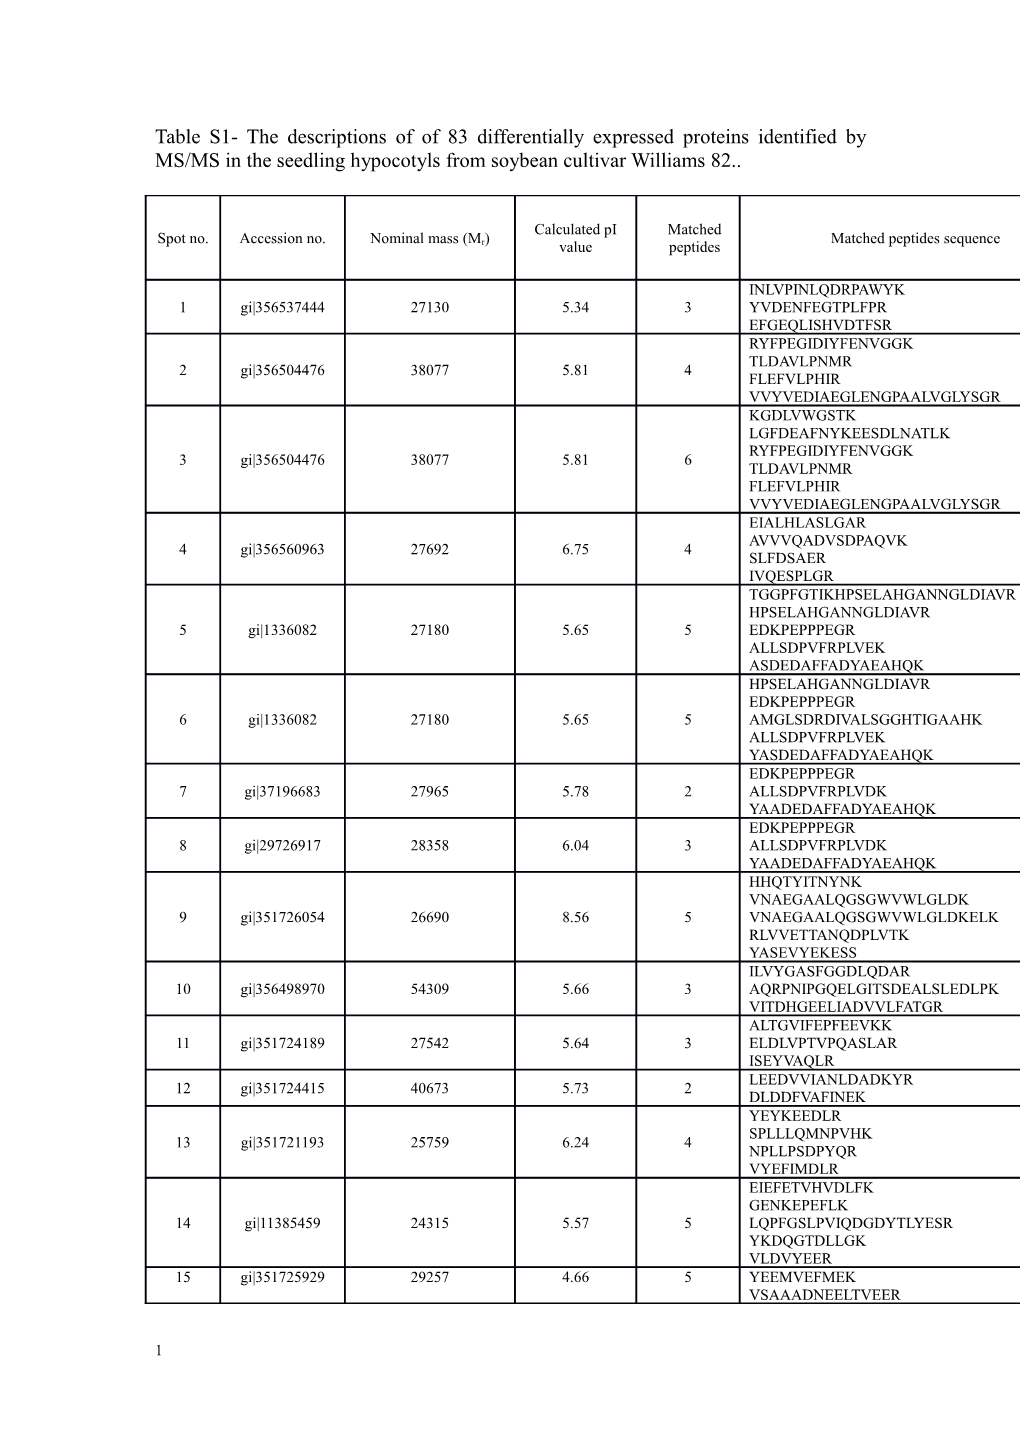 Table S1- the Descriptions of of 83 Differentially Expressed Proteins Identified by MS/MS